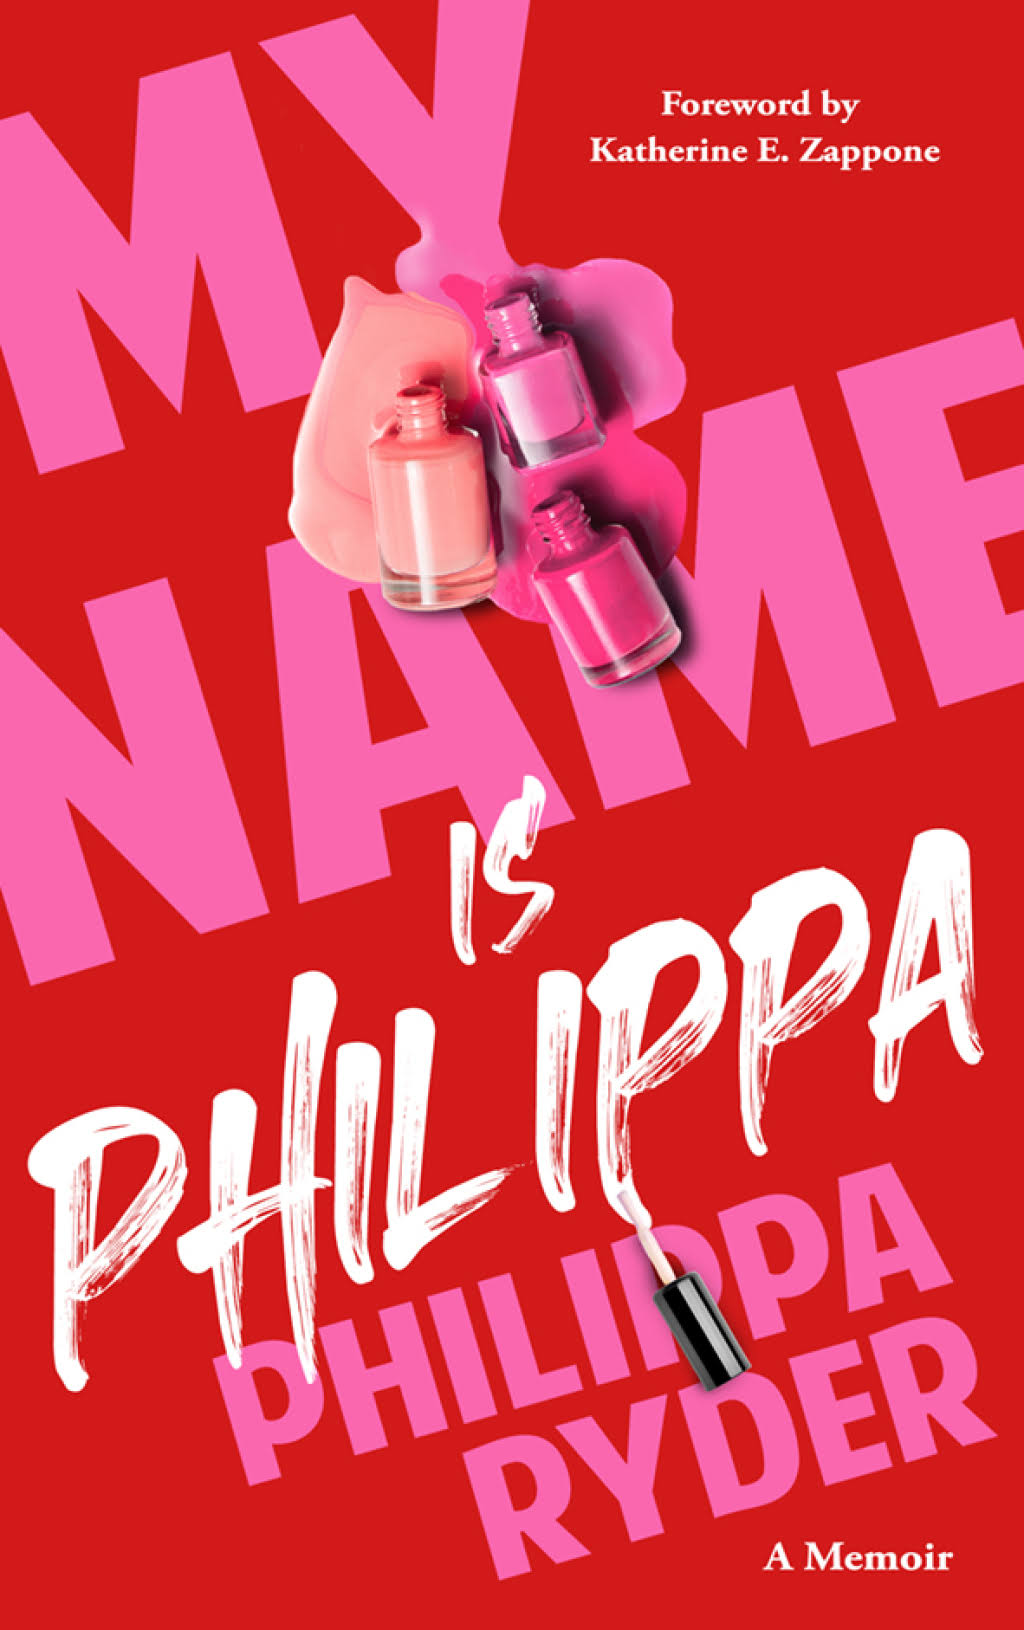 My Name Is Philippa by Philippa Ryder